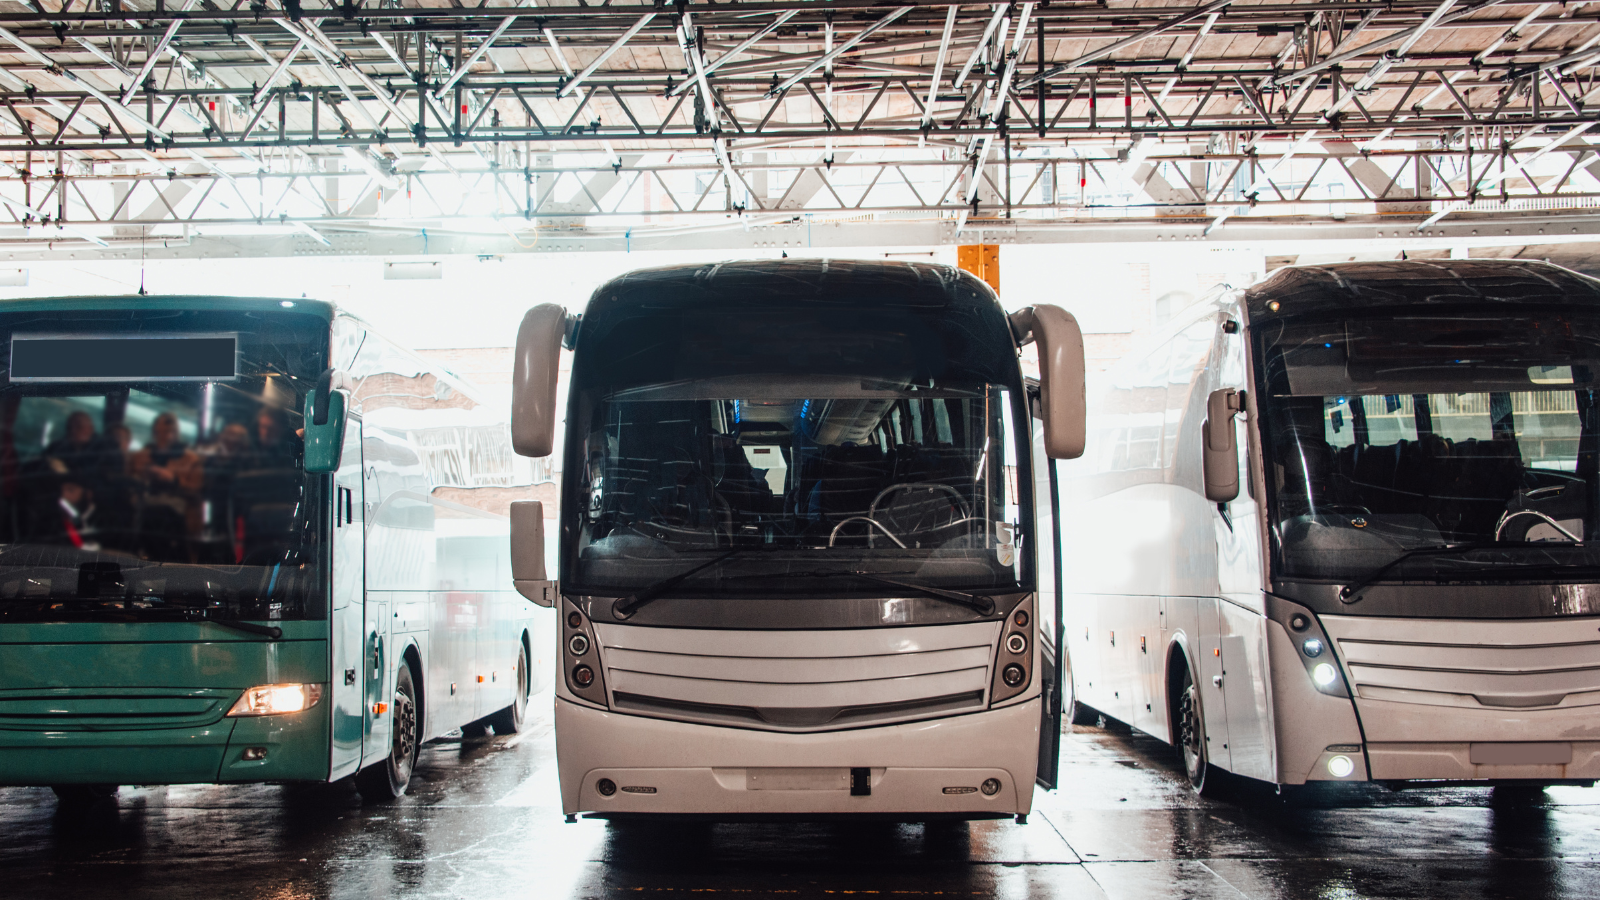  The Importance of Up-to-Date Security Systems in the Bus and Coach Industry